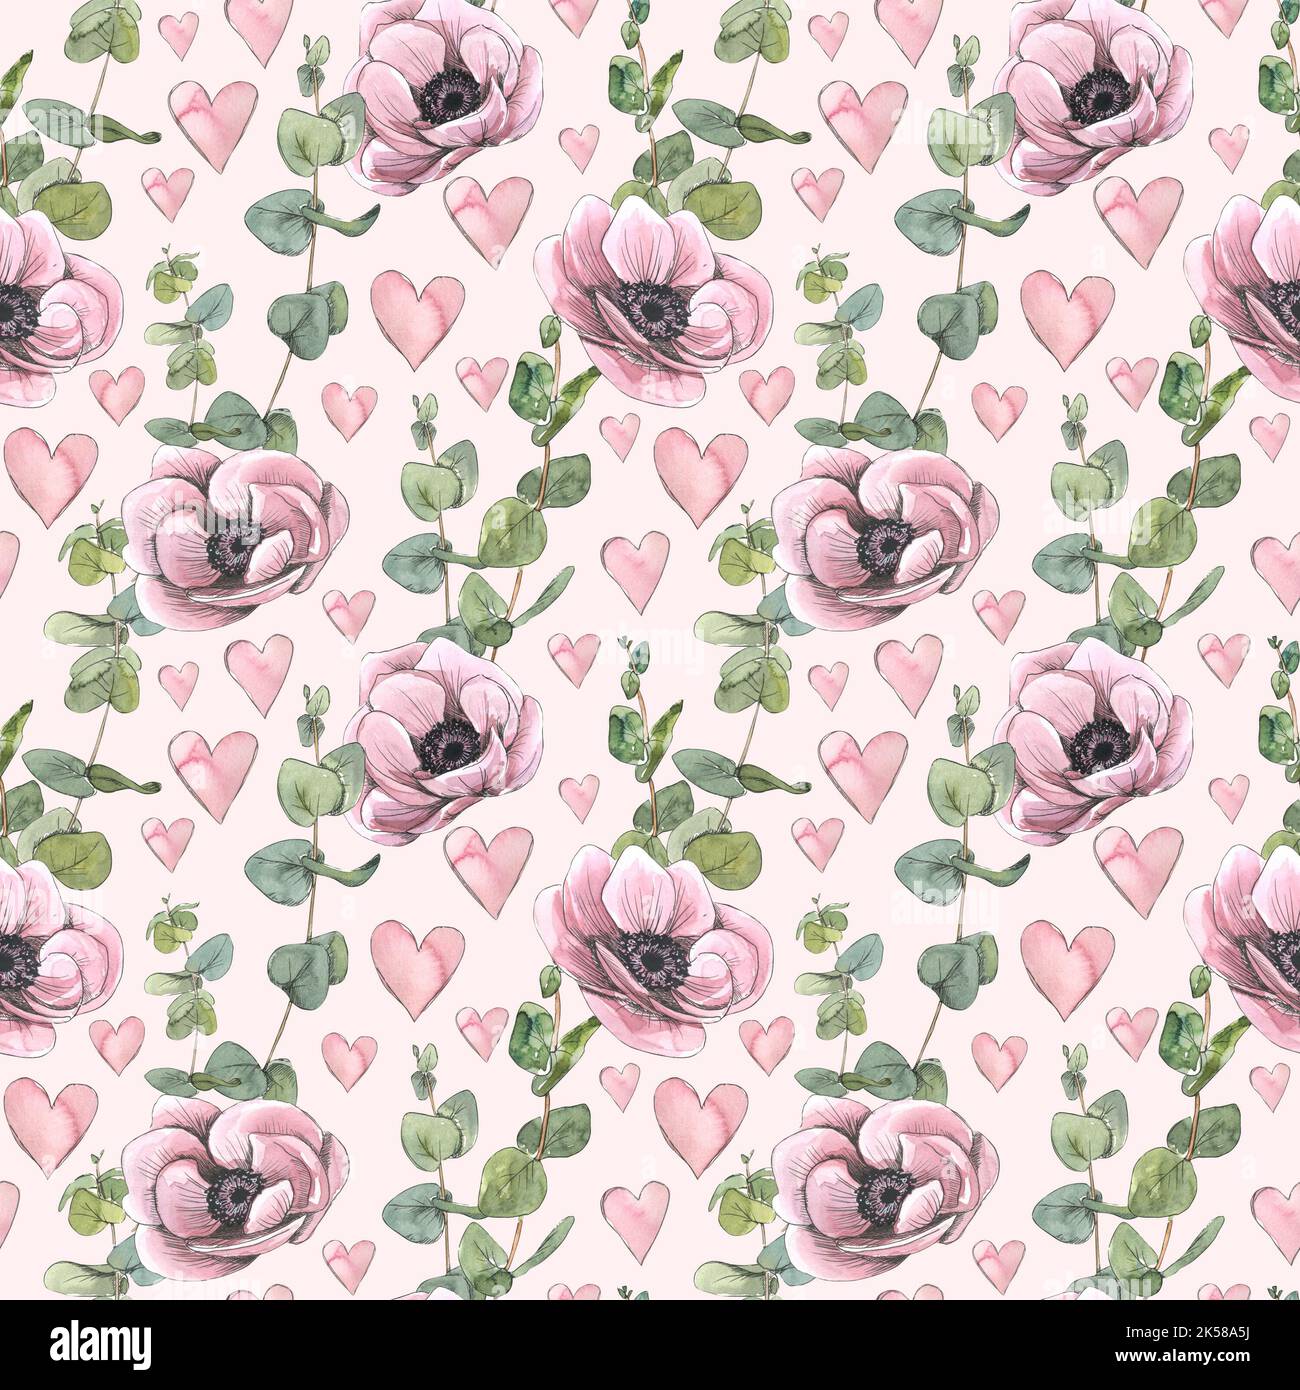 Seamless pattern with pink anemone flowers, eucalyptus twigs and hearts on a pink background. Watercolor illustration in sketch style with graphic Stock Photo